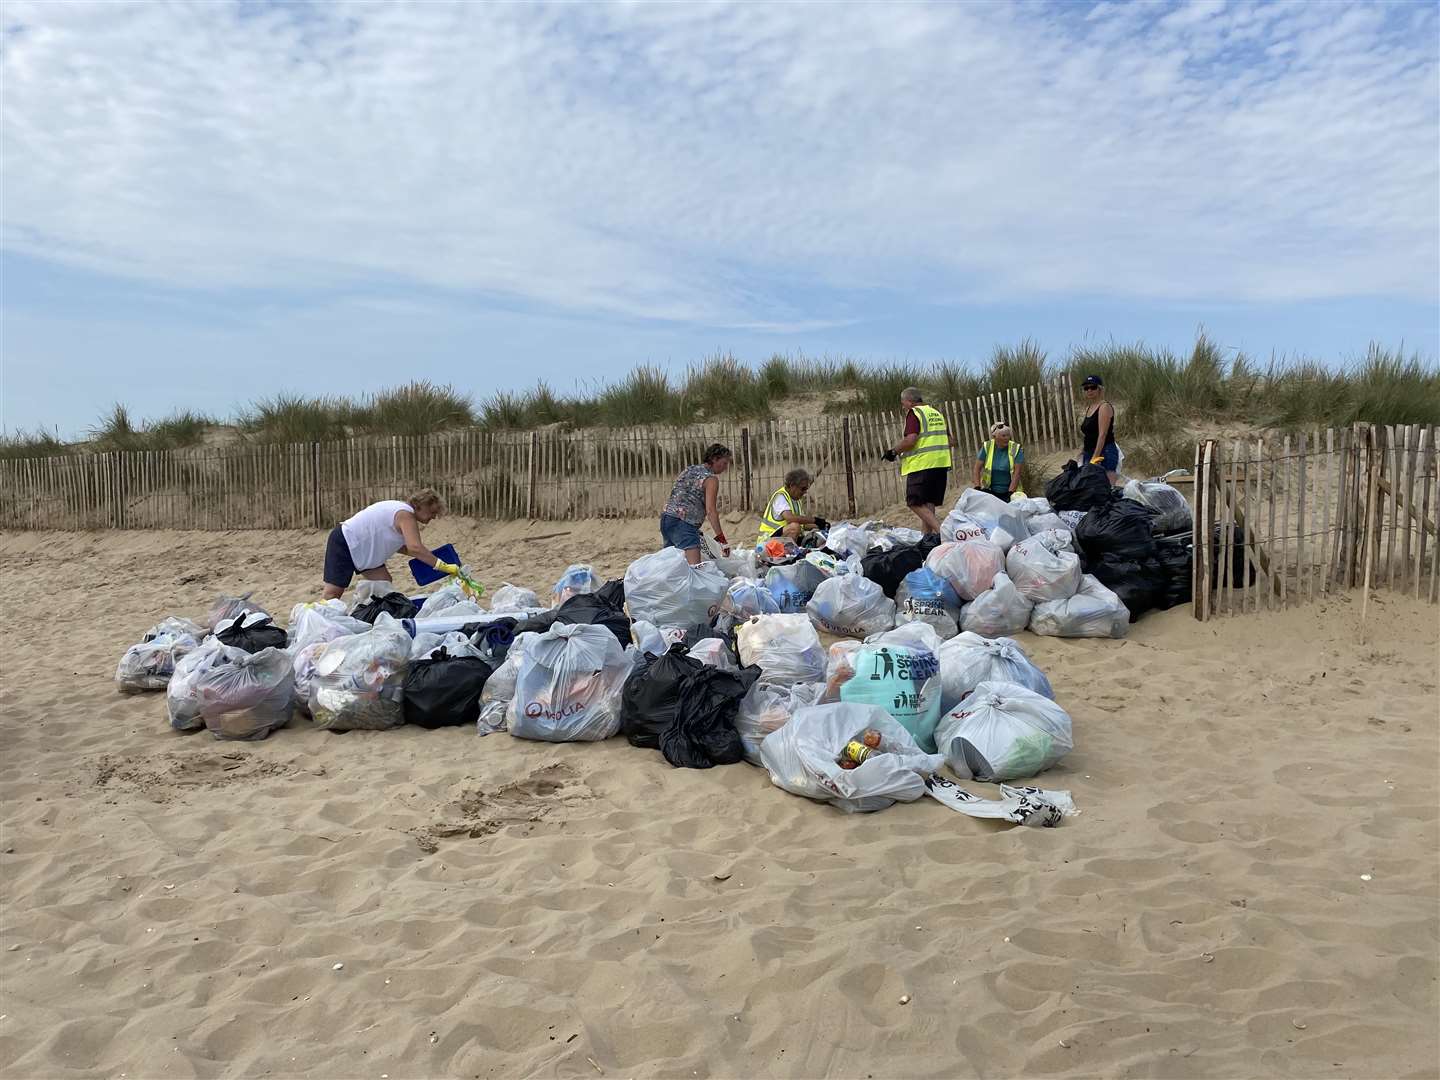 Hundreds of bags of rubbish were collected by volunteers the next day